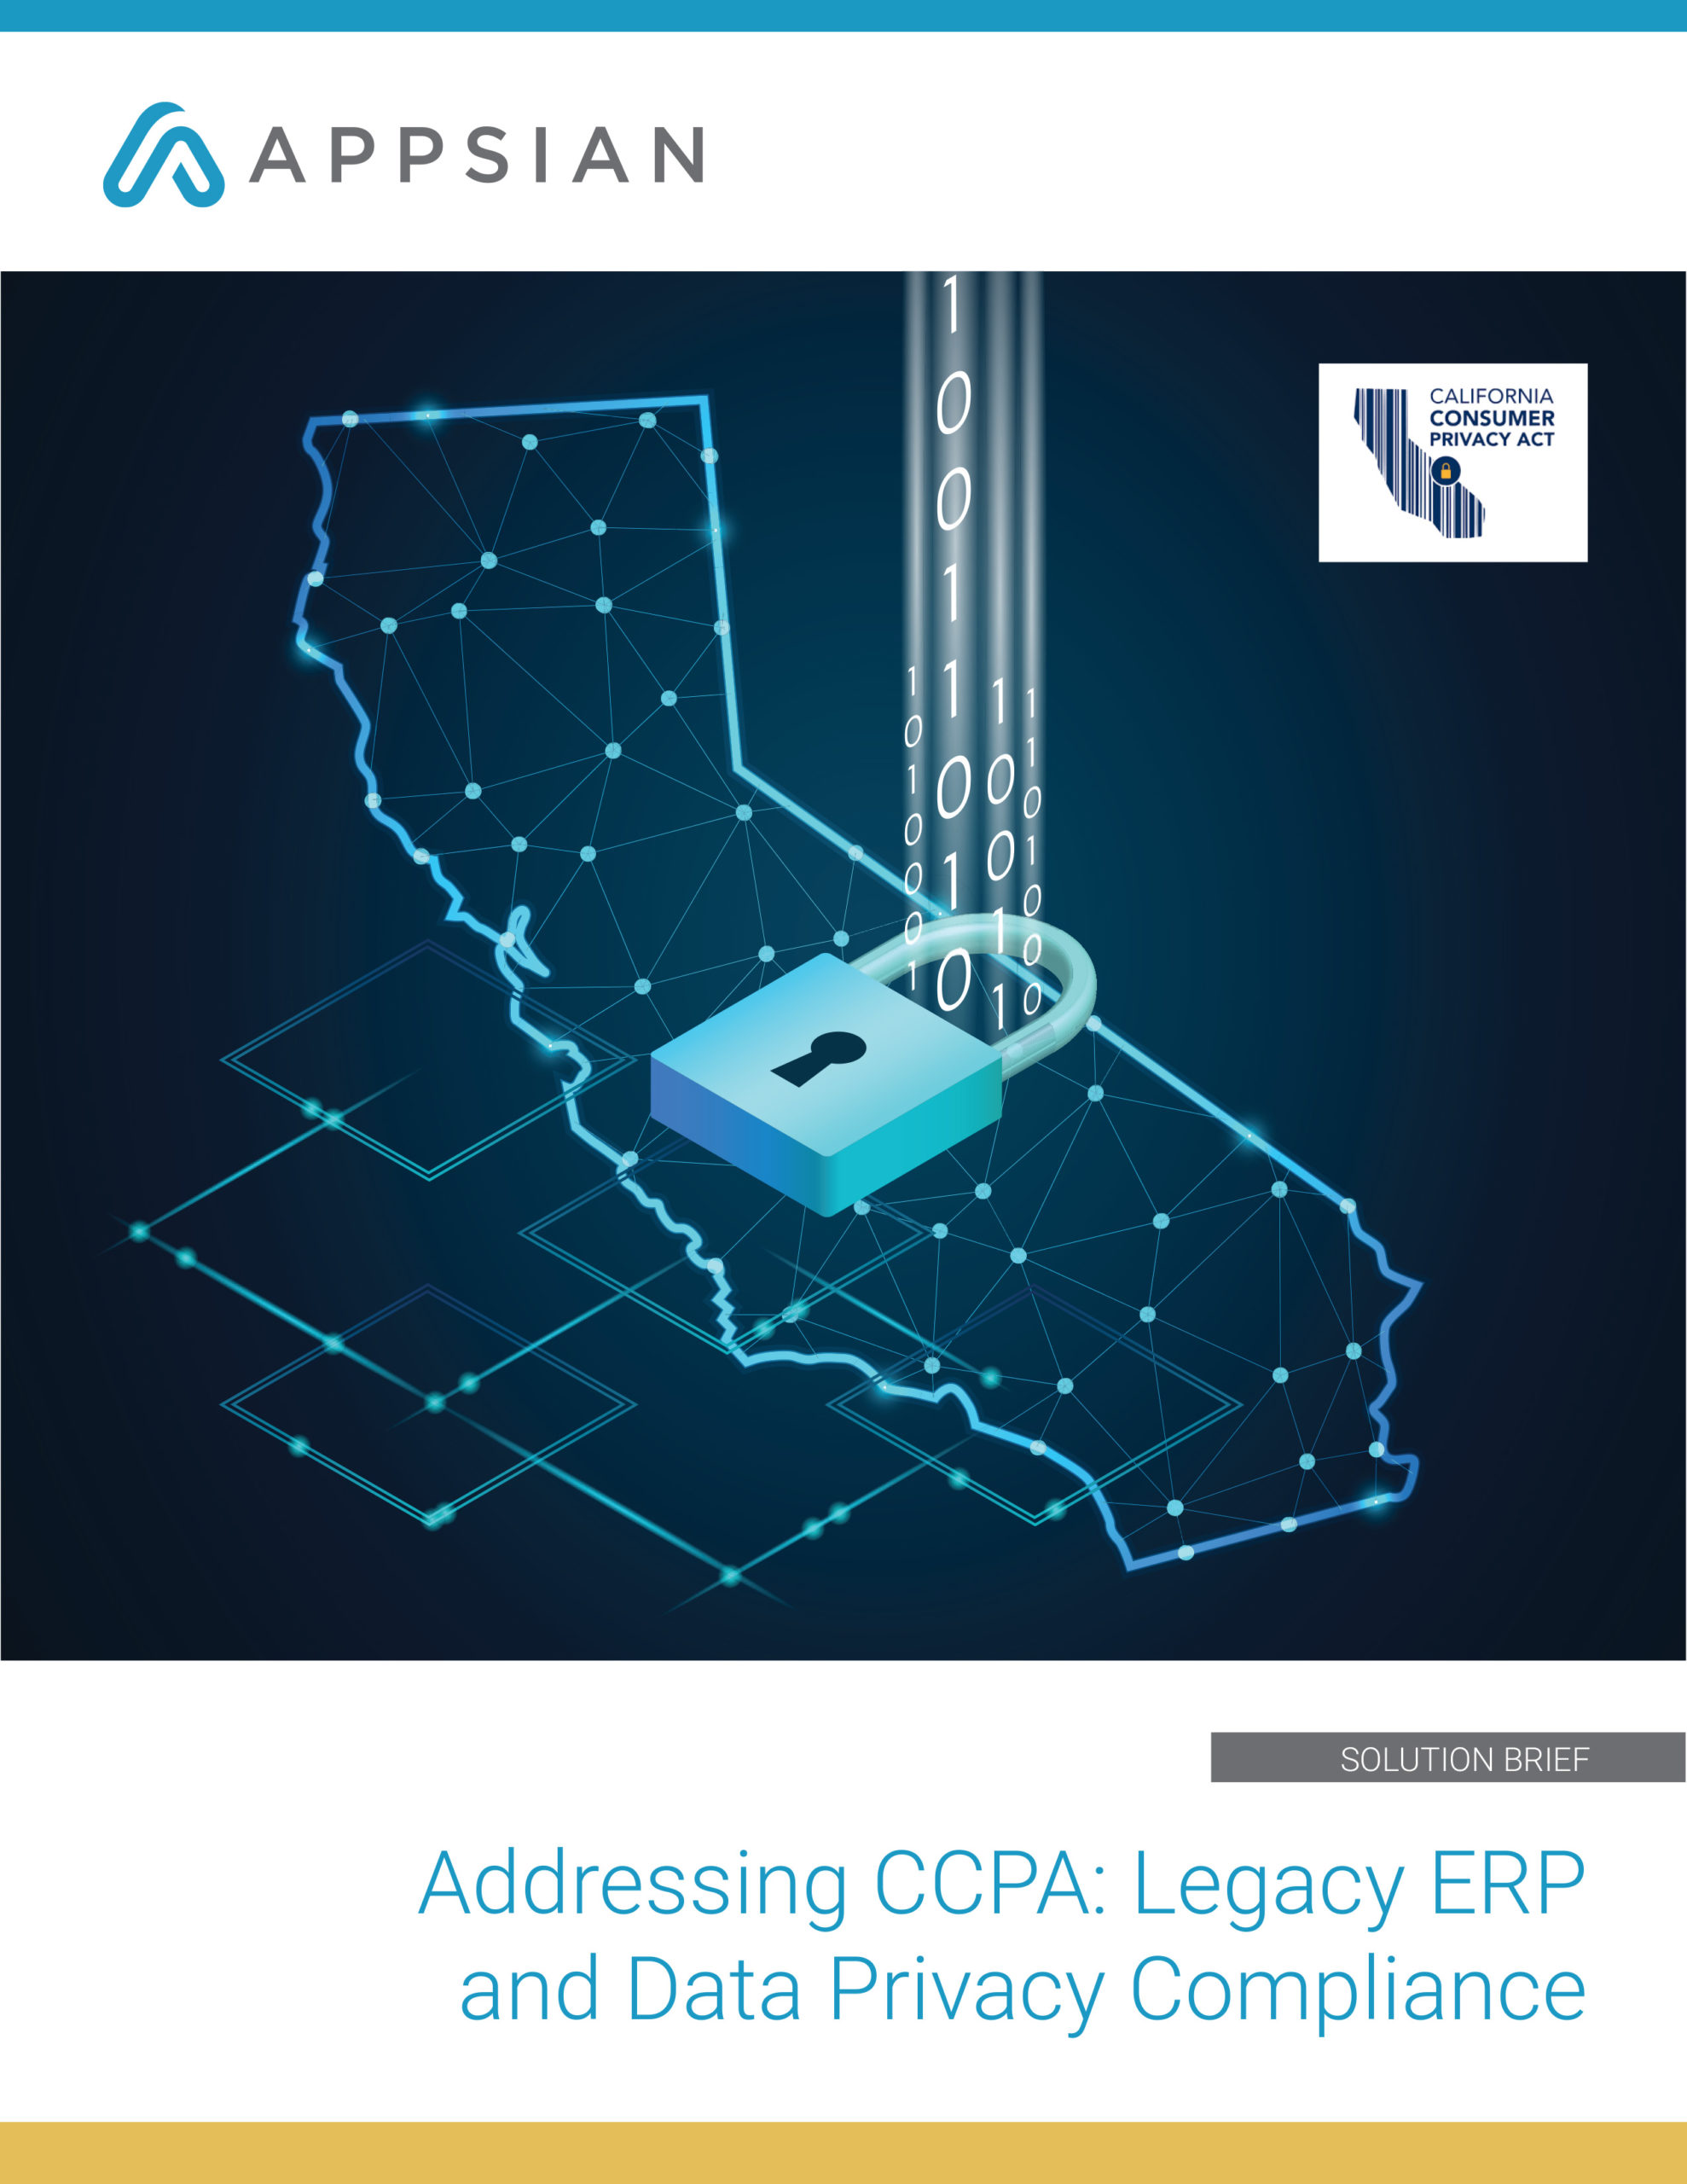 Establishing CCPA Compliance in Legacy PeopleSoft Systems